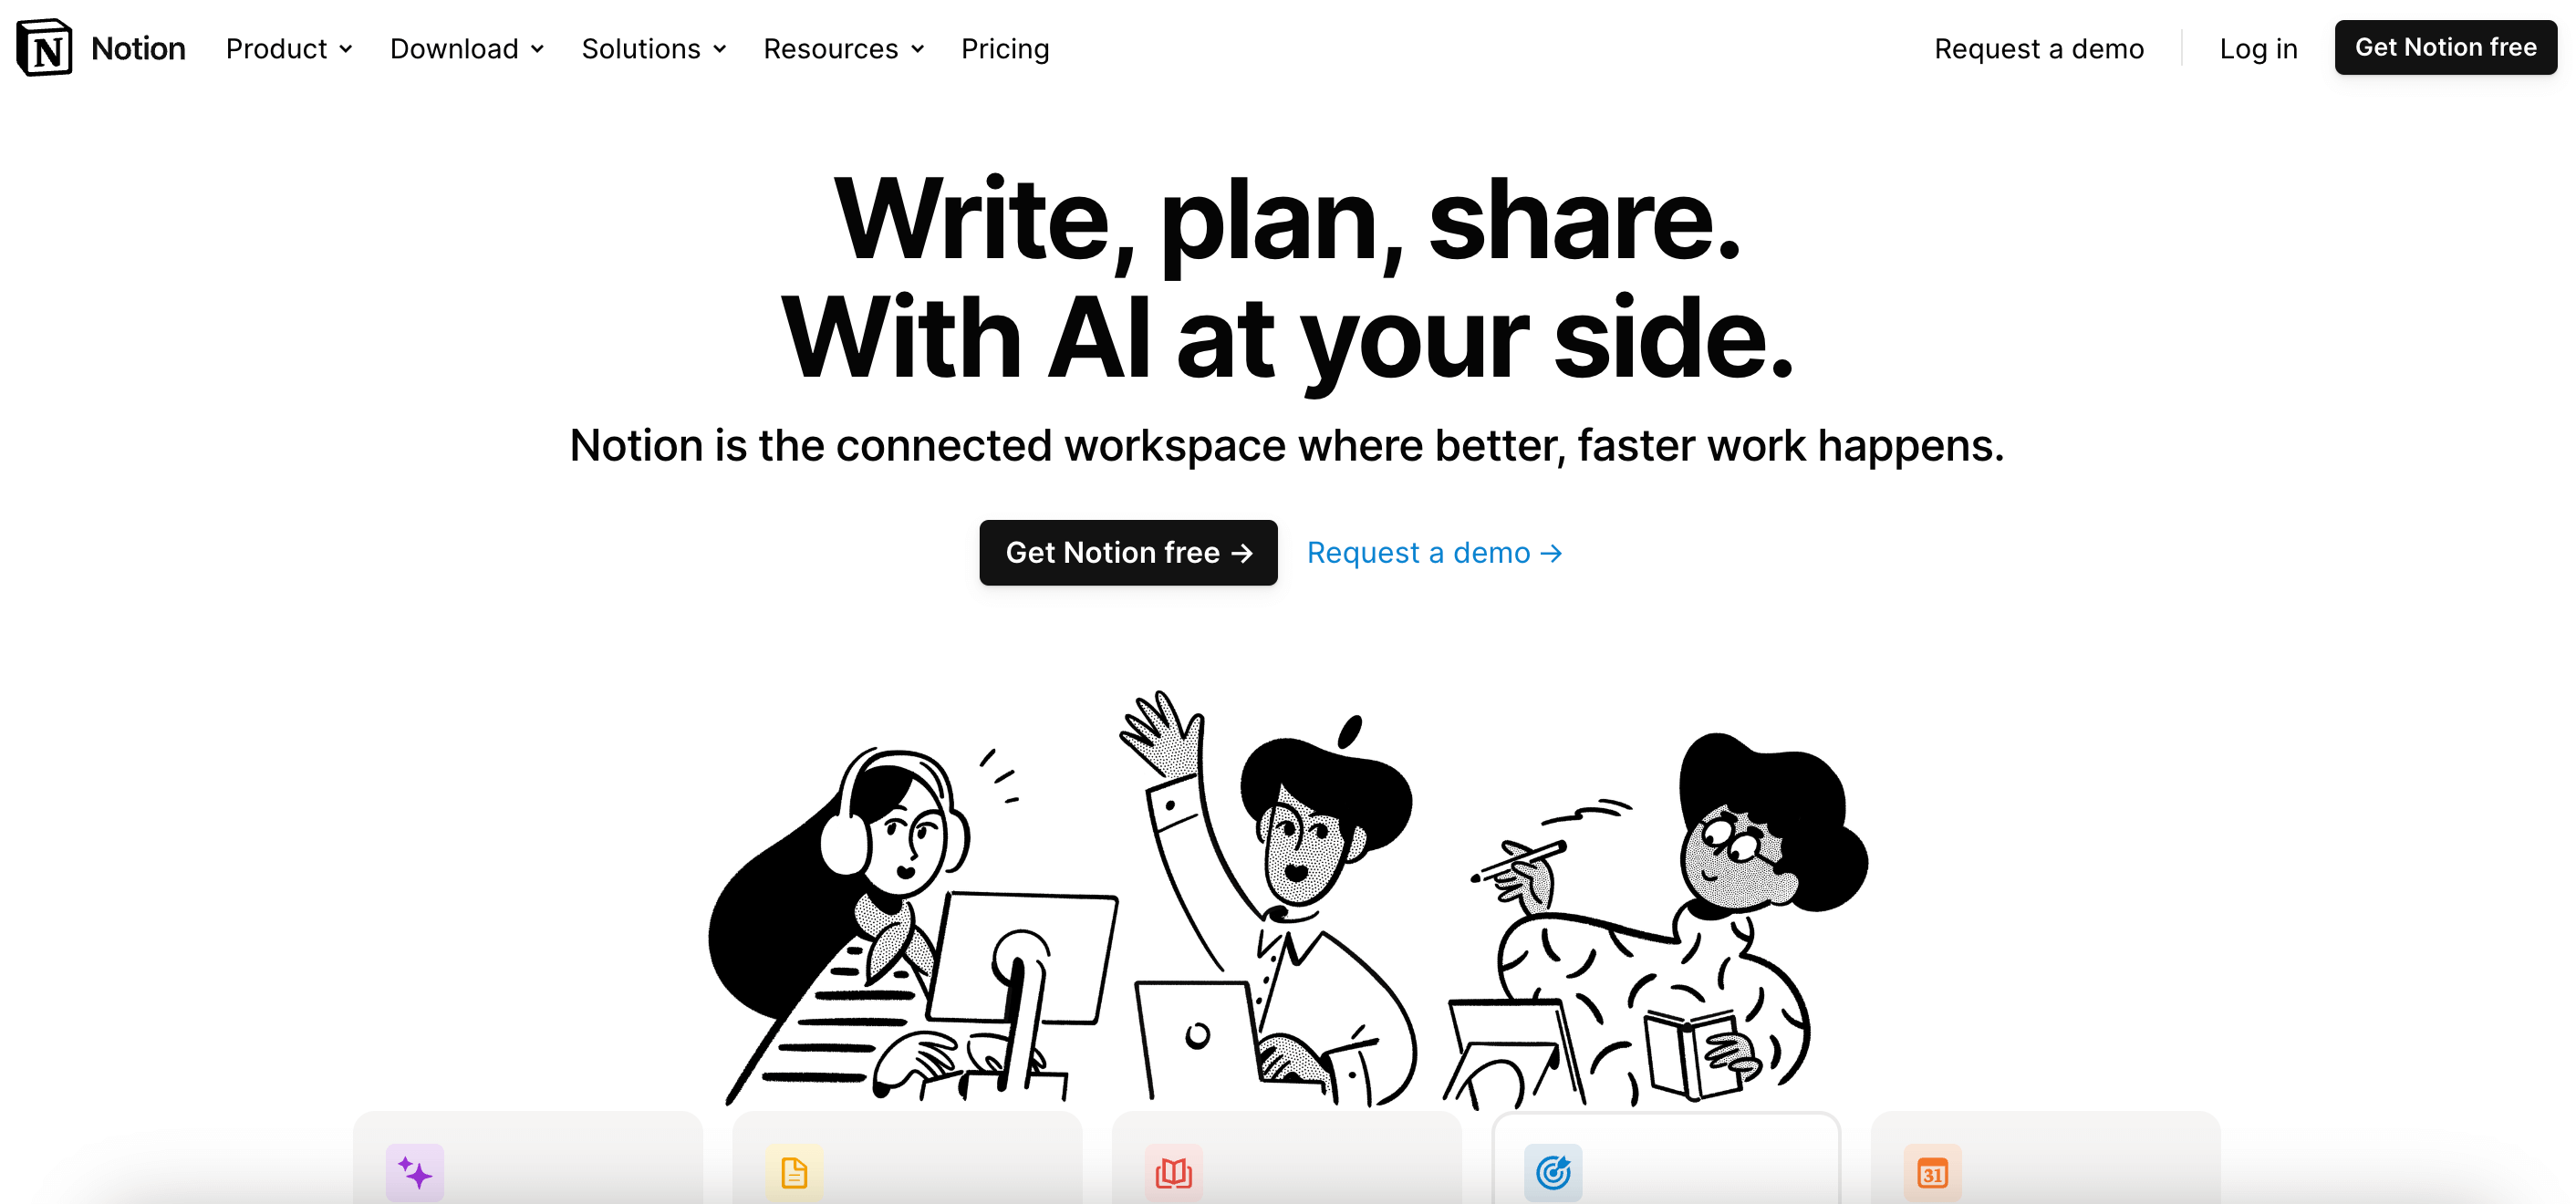 Notion's homepage